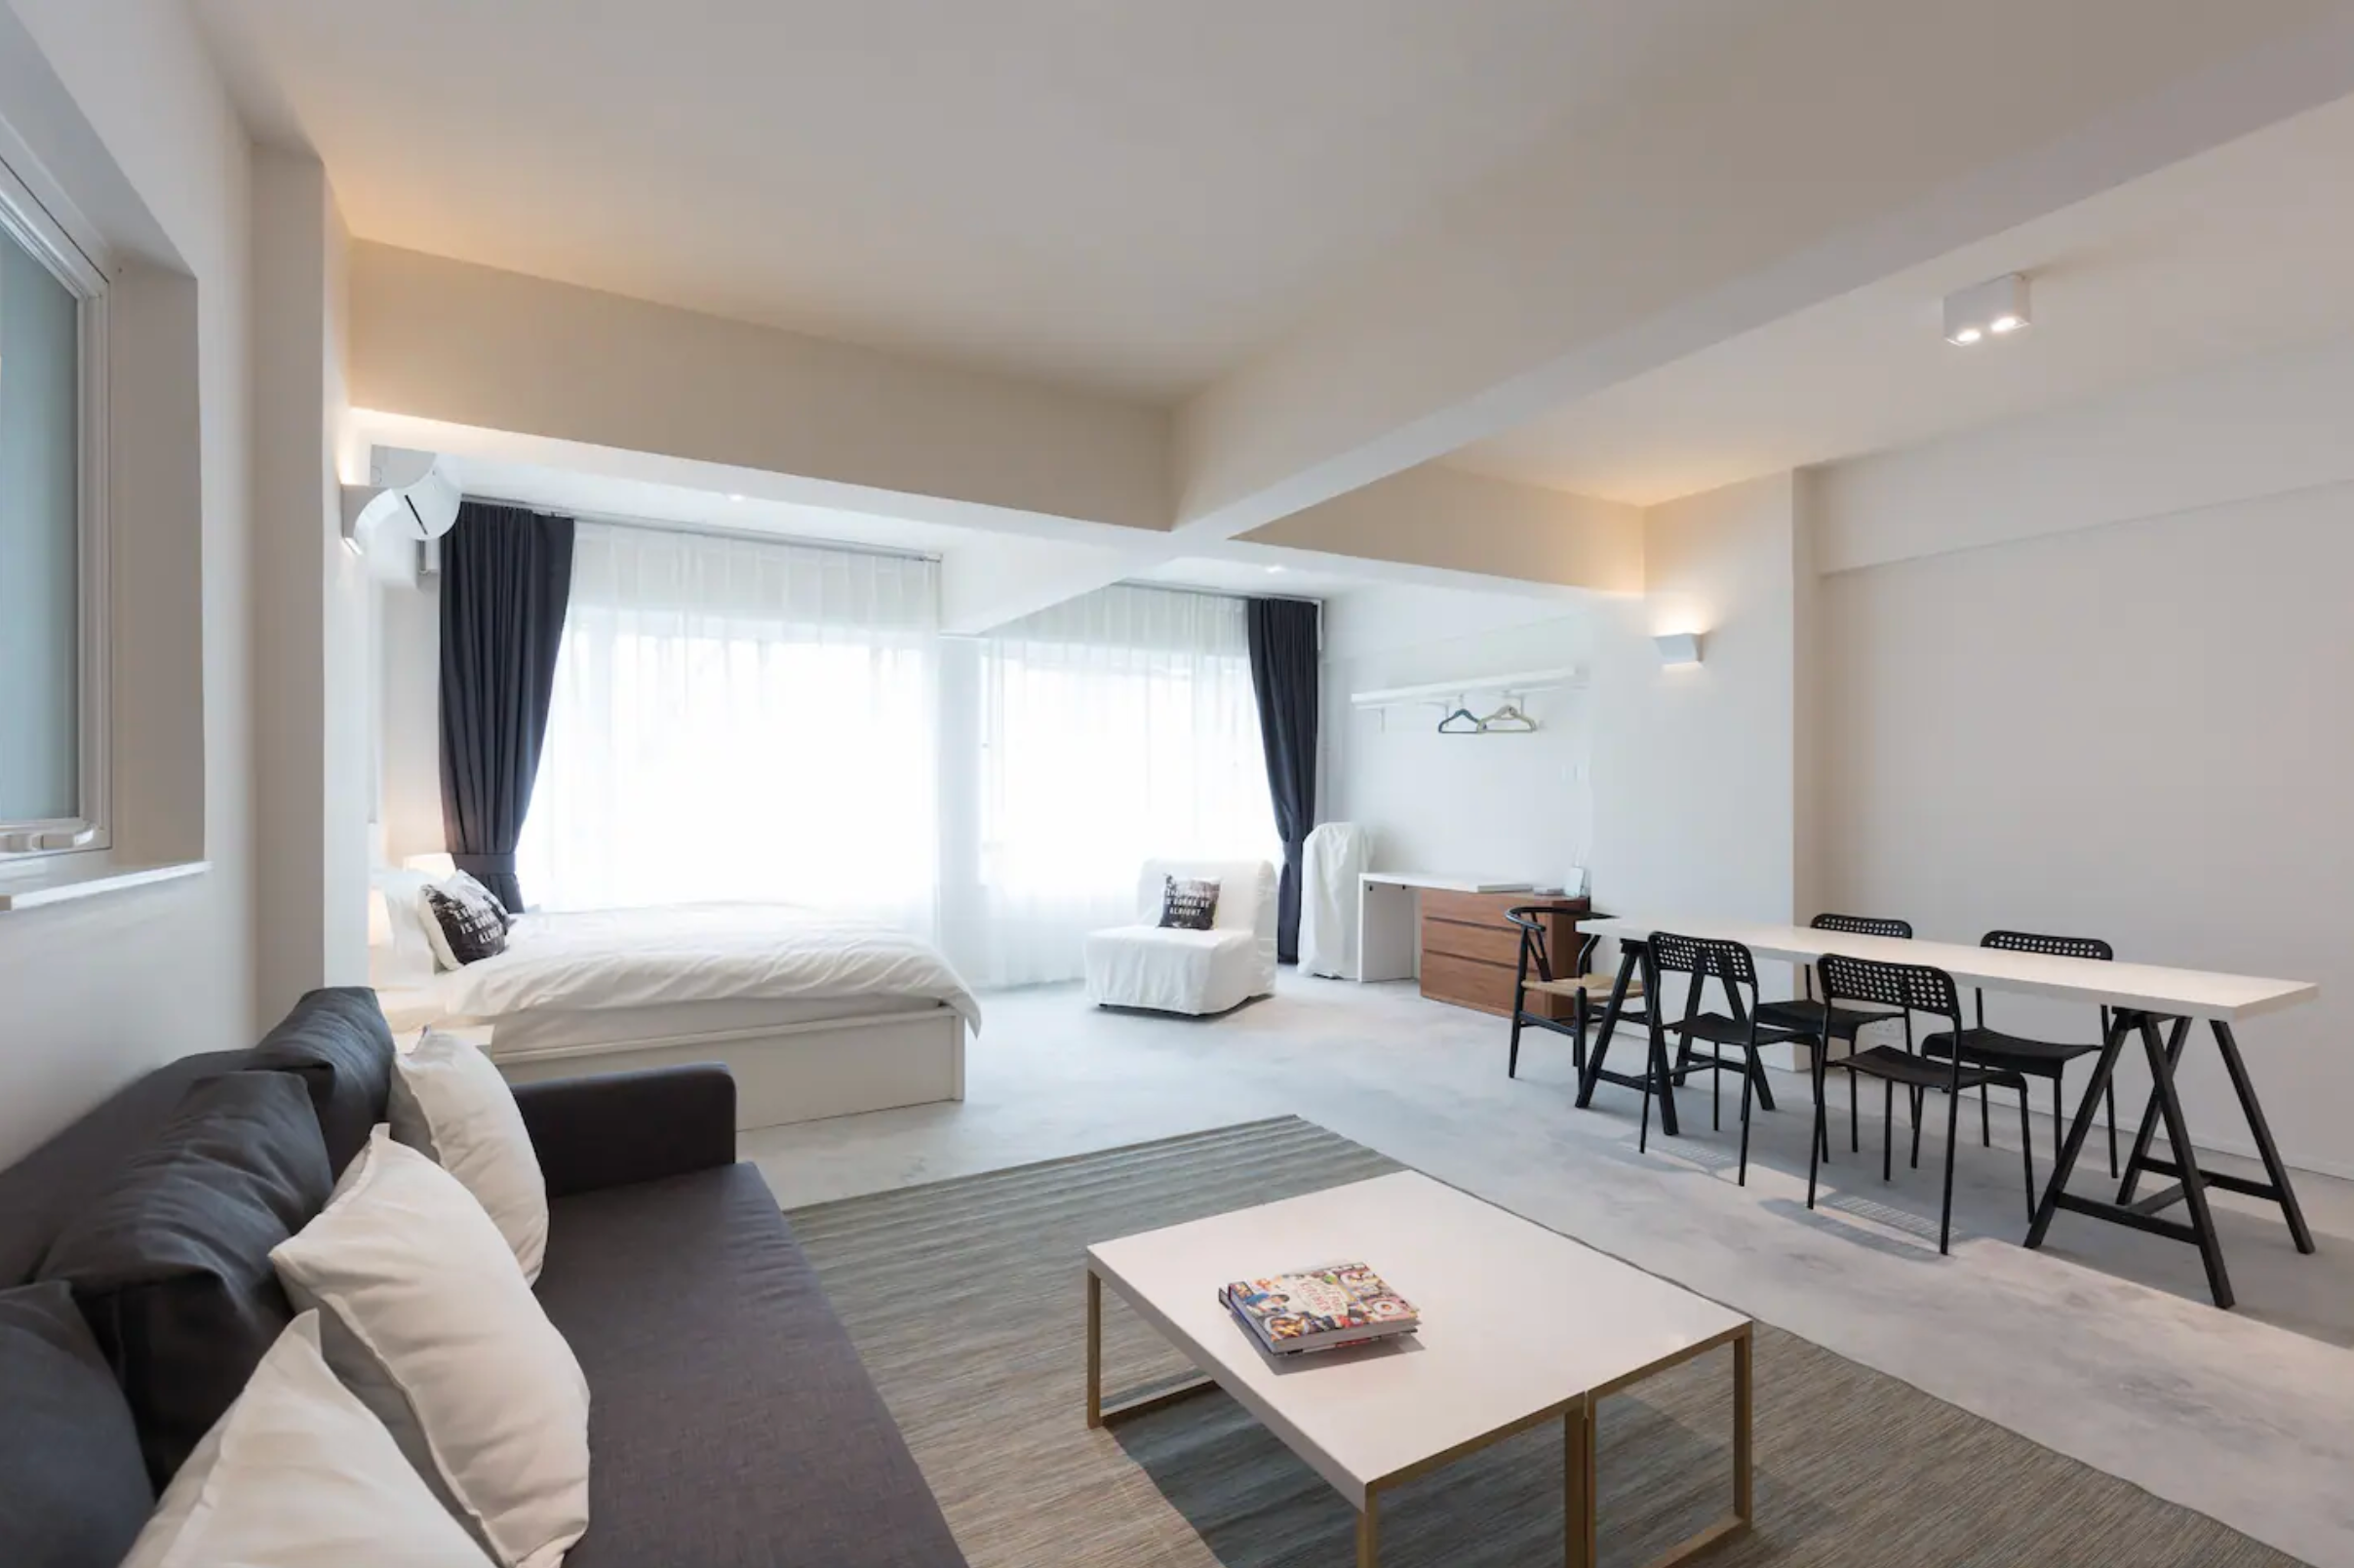 <p><strong>Bed & bath:</strong> Studio, 2 baths<br> <strong>Top amenities:</strong> Harbor views, flexible sleeping arrangements, well-connected location</p> <p>For those itching to explore the West Kowloon Cultural District, where M+ and the Hong Kong Palace Museum are located, this freshly renovated apartment deserves a spot on your wishlist. Although it has an open-plan studio layout (not much privacy) and is ideal for a solo traveler or a couple, if you need to squeeze in a couple of extra people, the 850-square-foot space is large enough to fit four beds (one king-size bed, two queen sofa beds, and a twin sofa bed), a dining area, and two bathrooms. Perks include everything from amazing harbor views to motorized black-out curtains, fiber-optic Wi-Fi, smart TOTO toilets, and “dazzling white” luxury linens, as one reviewer commented. The location checks all the boxes, too, ensuring easy access to the MTR, temples, local restaurants, markets, and world-class shopping.</p> $245, Airbnb (starting price). <a href="https://www.airbnb.com/rooms/9534474">Get it now!</a><p>Sign up to receive the latest news, expert tips, and inspiration on all things travel</p><a href="https://www.cntraveler.com/newsletter/the-daily?sourceCode=msnsend">Inspire Me</a>